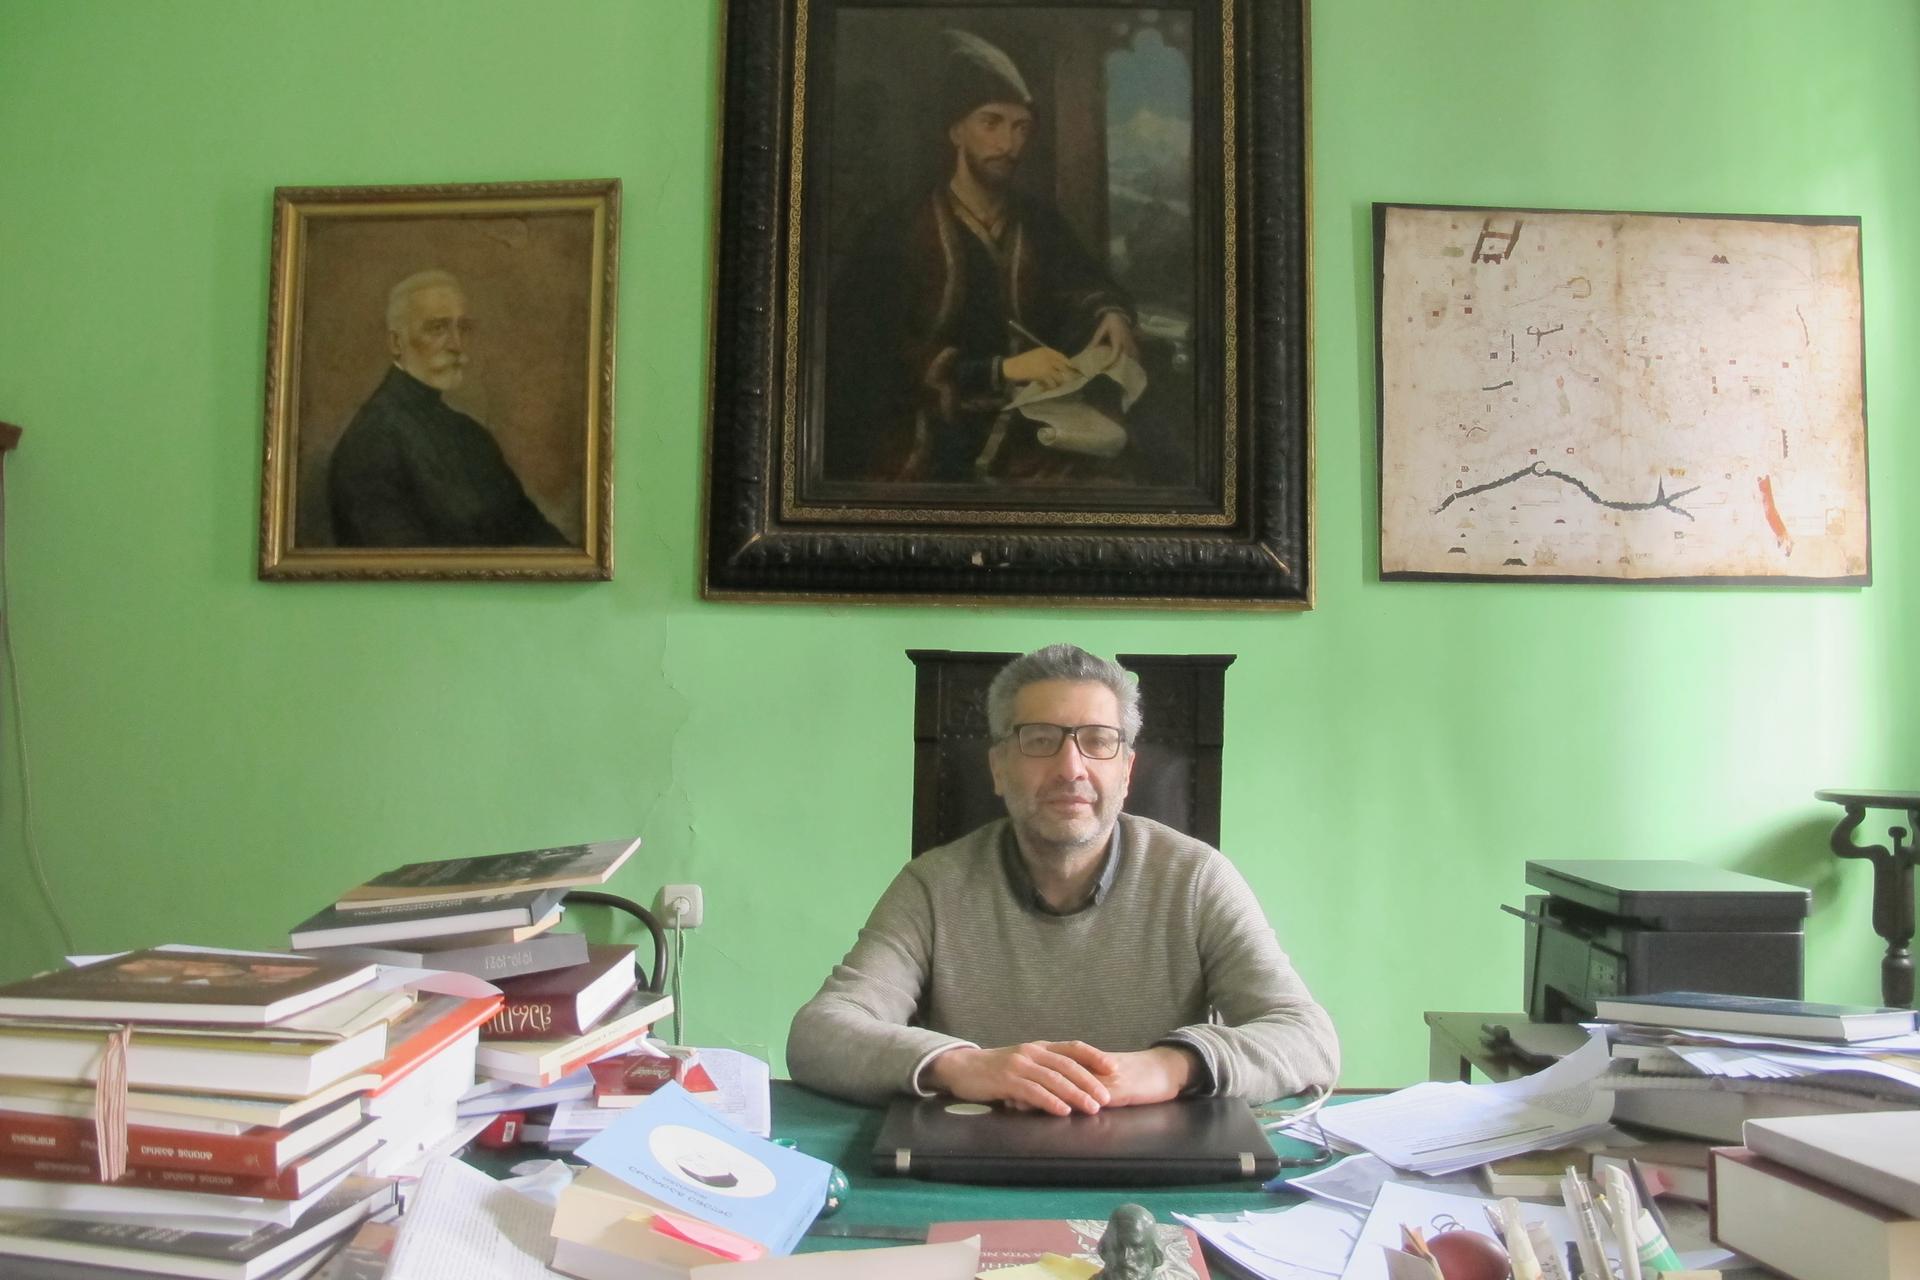 Lasha Bakradse, the director of the State Museum of Georgian Literature, was on a commission to improve the Stalin Museum in Gori, Georgia.